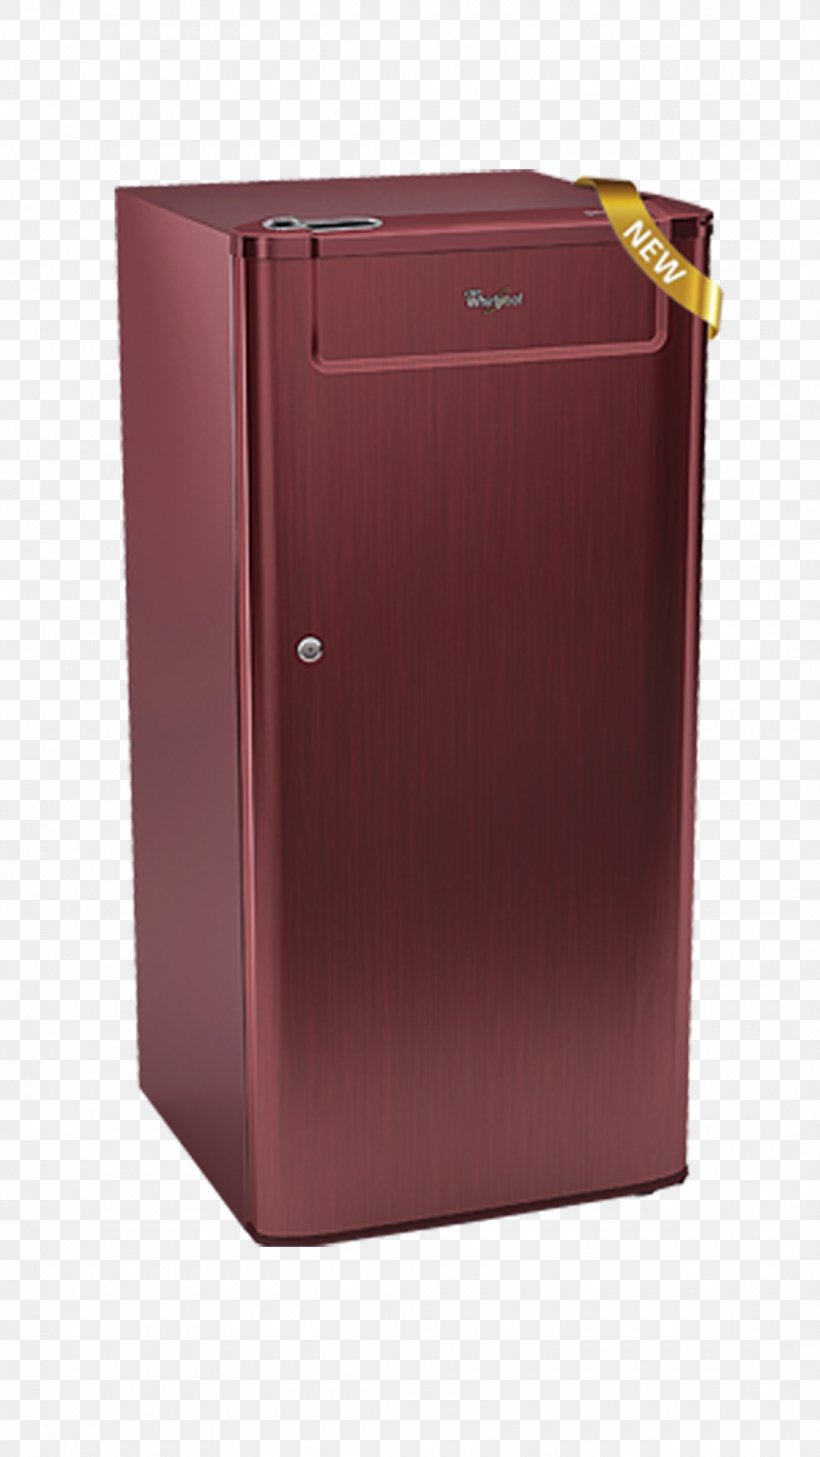 Direct Cool Refrigerator Whirlpool Corporation Home Appliance Whirlpool Of India Limited, PNG, 1080x1920px, Direct Cool, Door, Home Appliance, Lg Electronics, Price Download Free